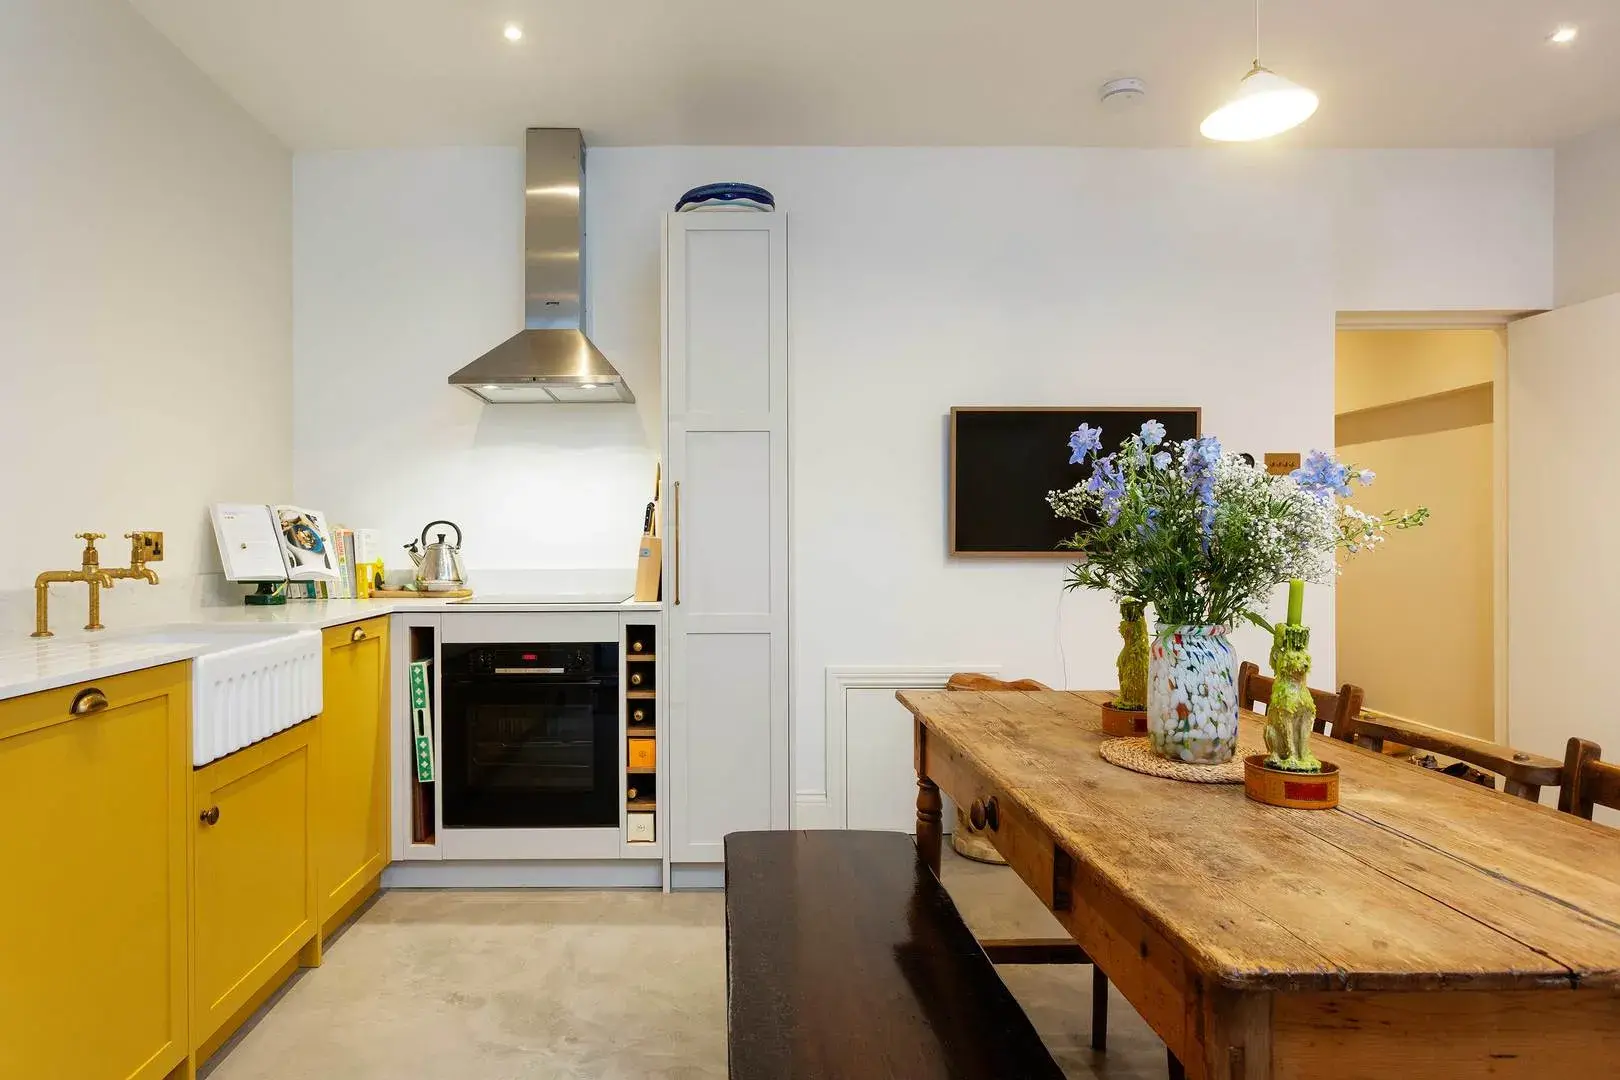 Ladbroke Road, holiday home in Notting Hill, London